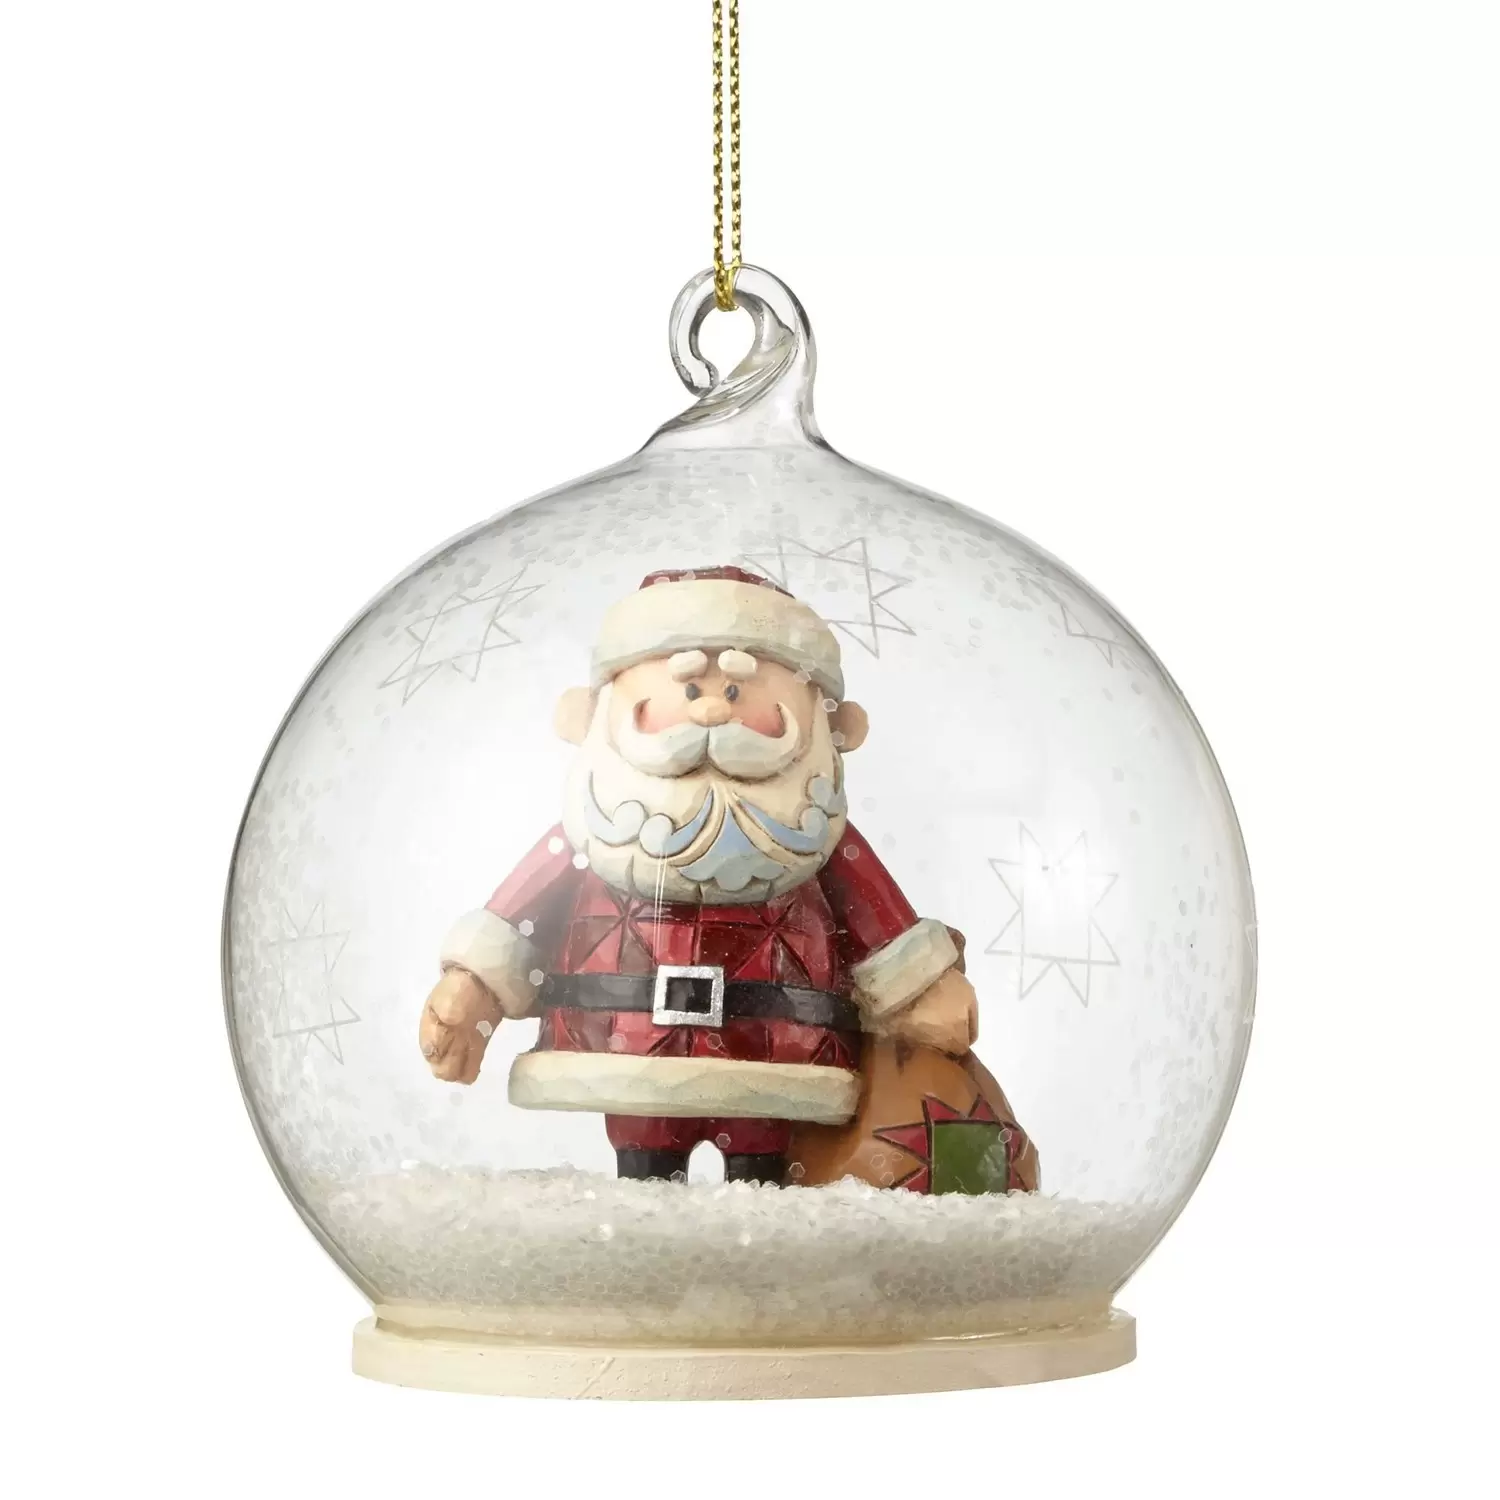 Cartoons Characters by Jim Shore - Santa in Dome Hanging Ornament